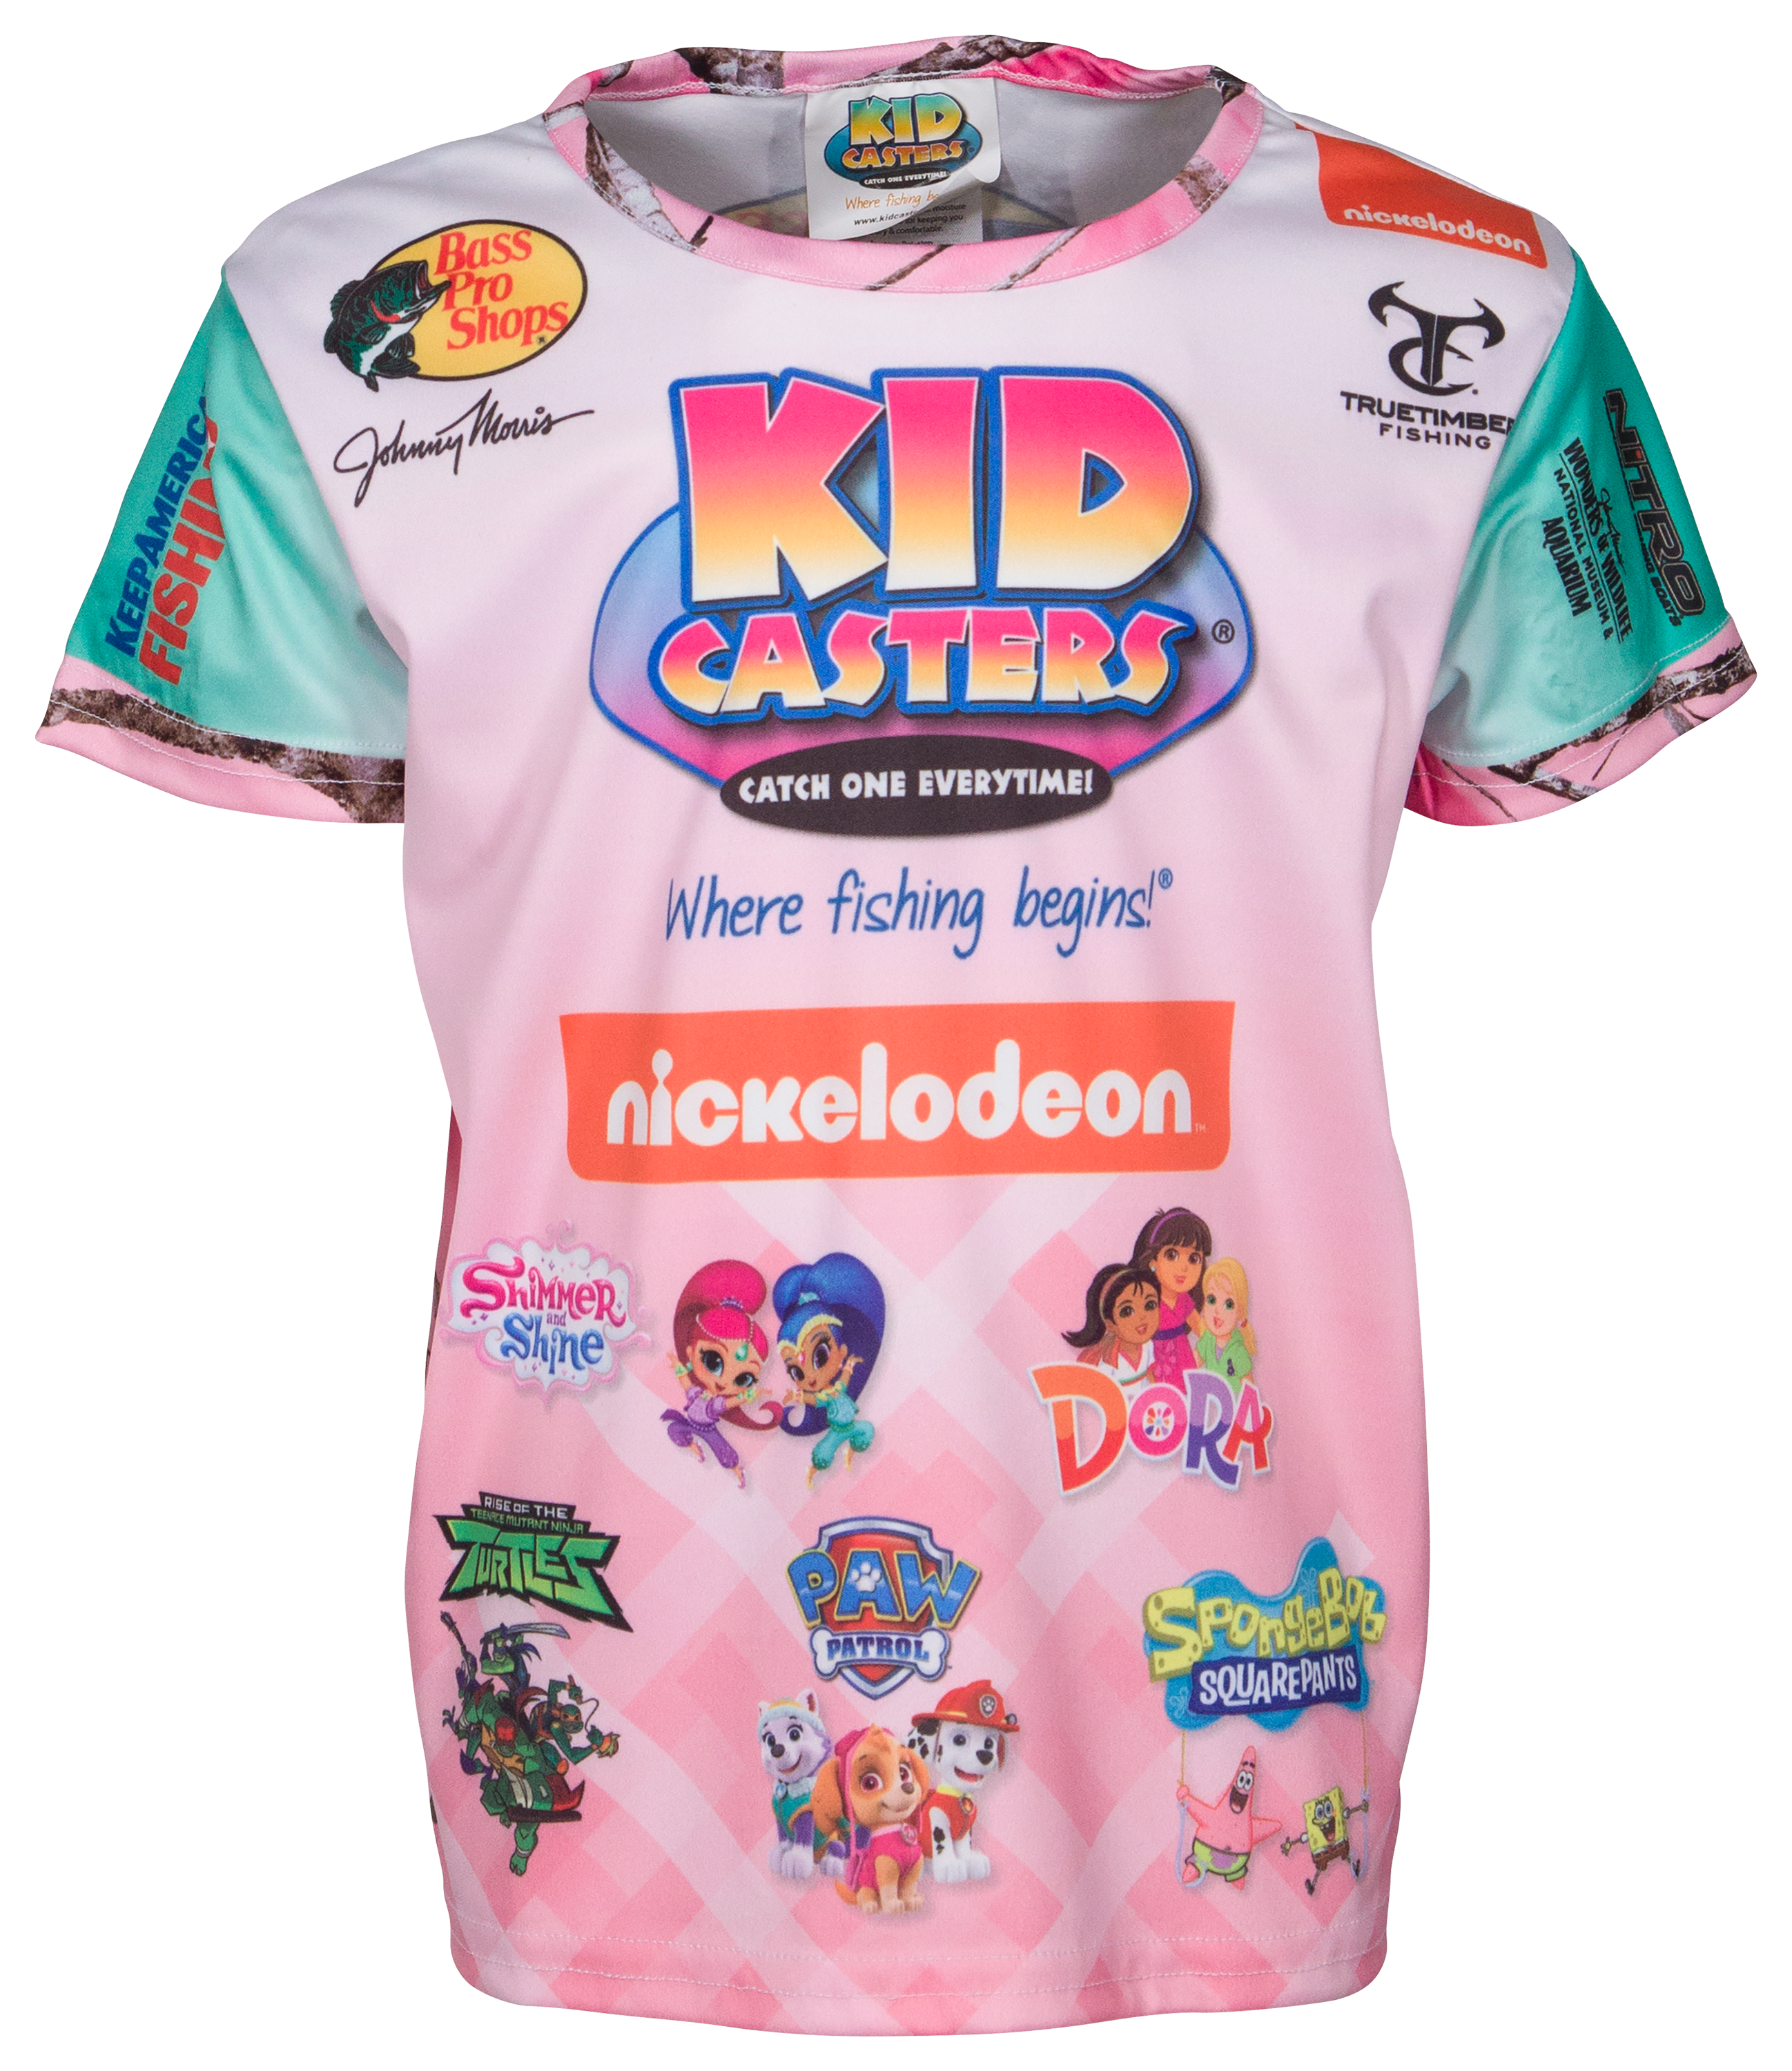 Bass Pro Shops Kid Casters Fishing Short-Sleeve Shirt for Toddlers or Girls